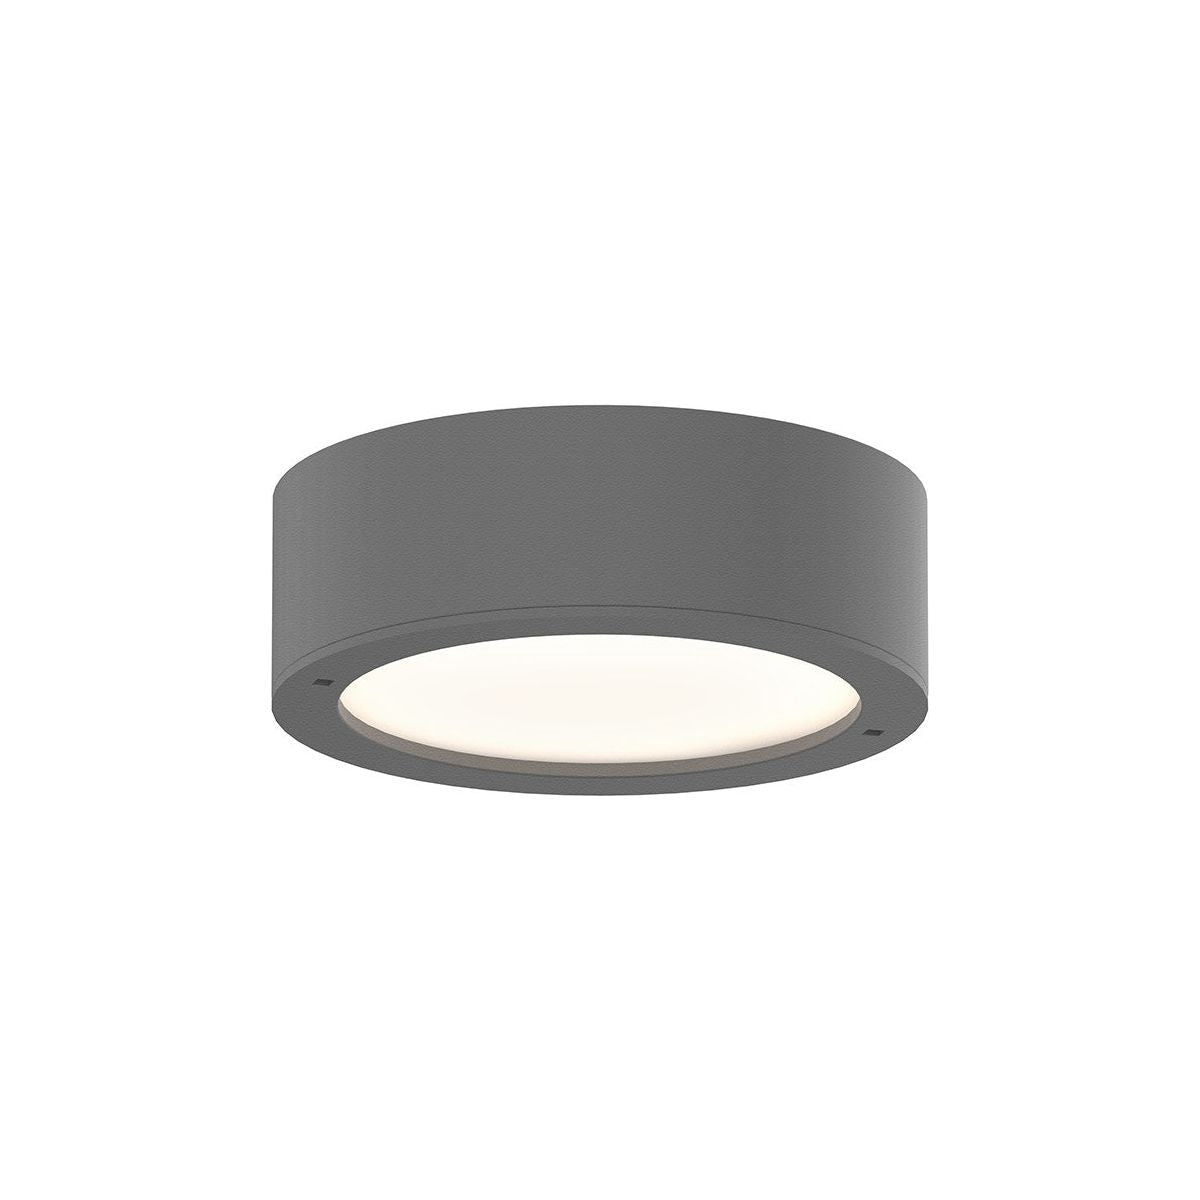 REALS LED Surface Mount with Plate Lens